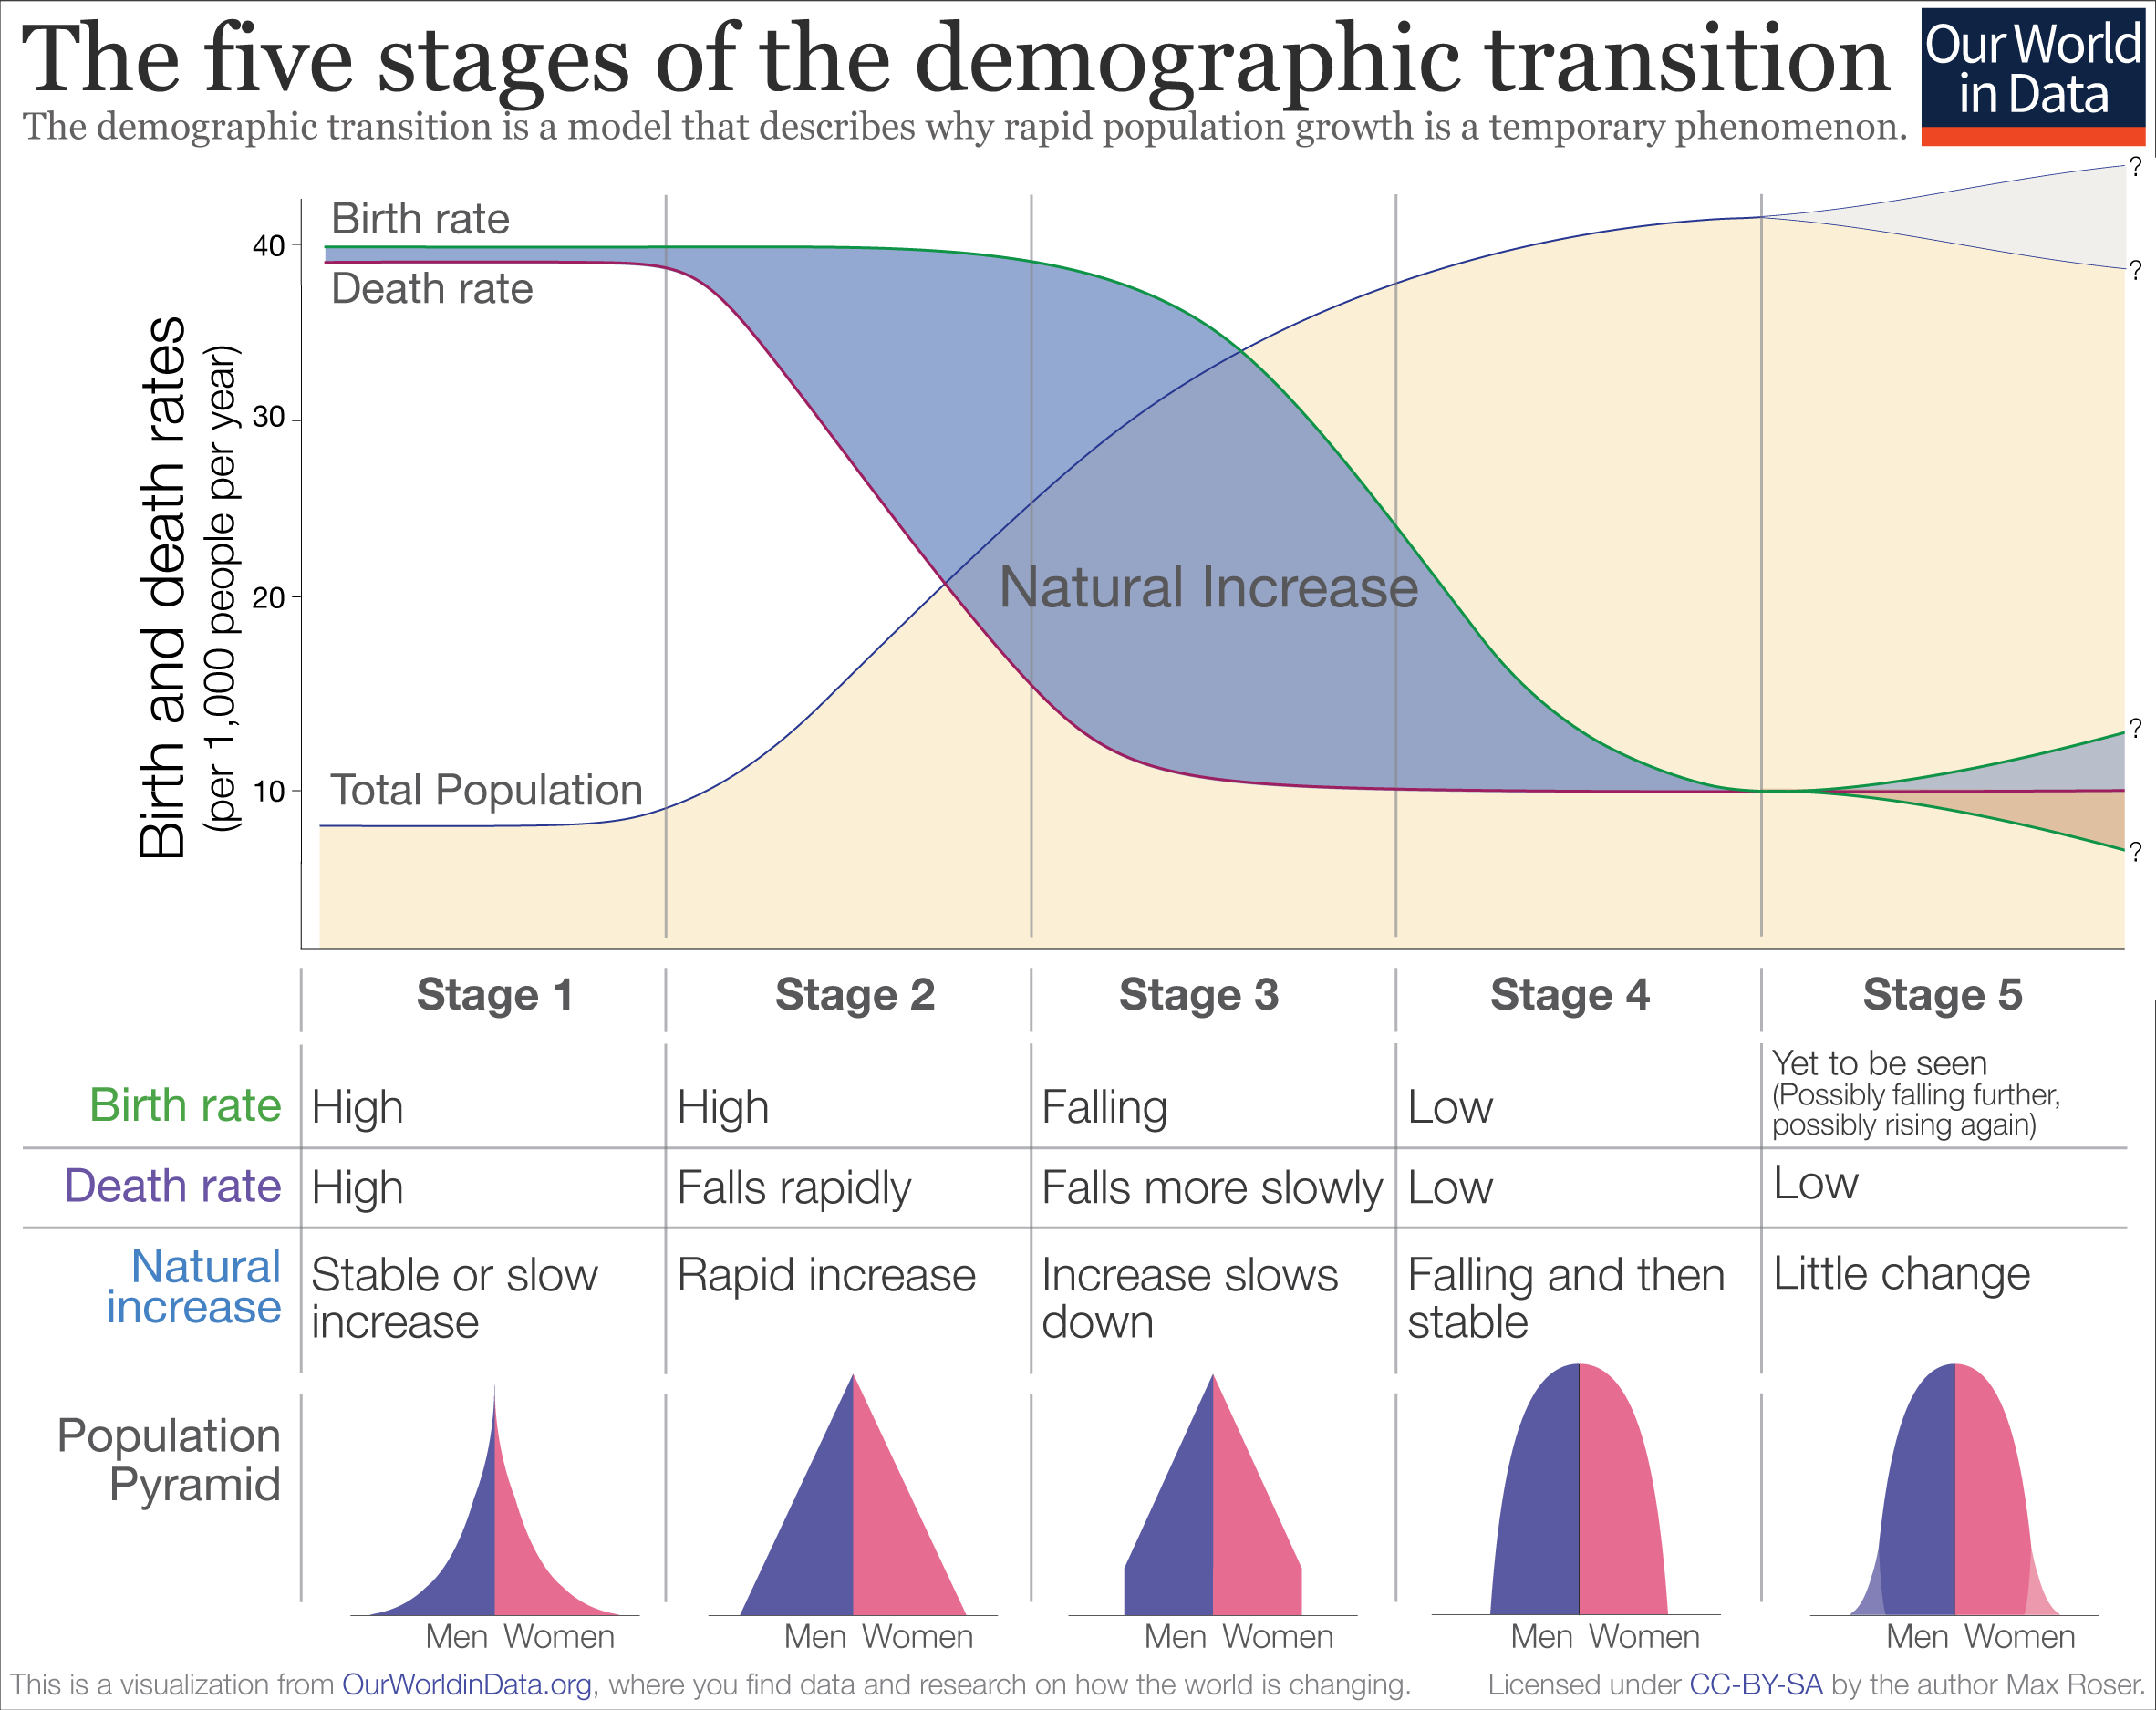 at what stages of the demographic transition are the birth rates and death rates about the same?